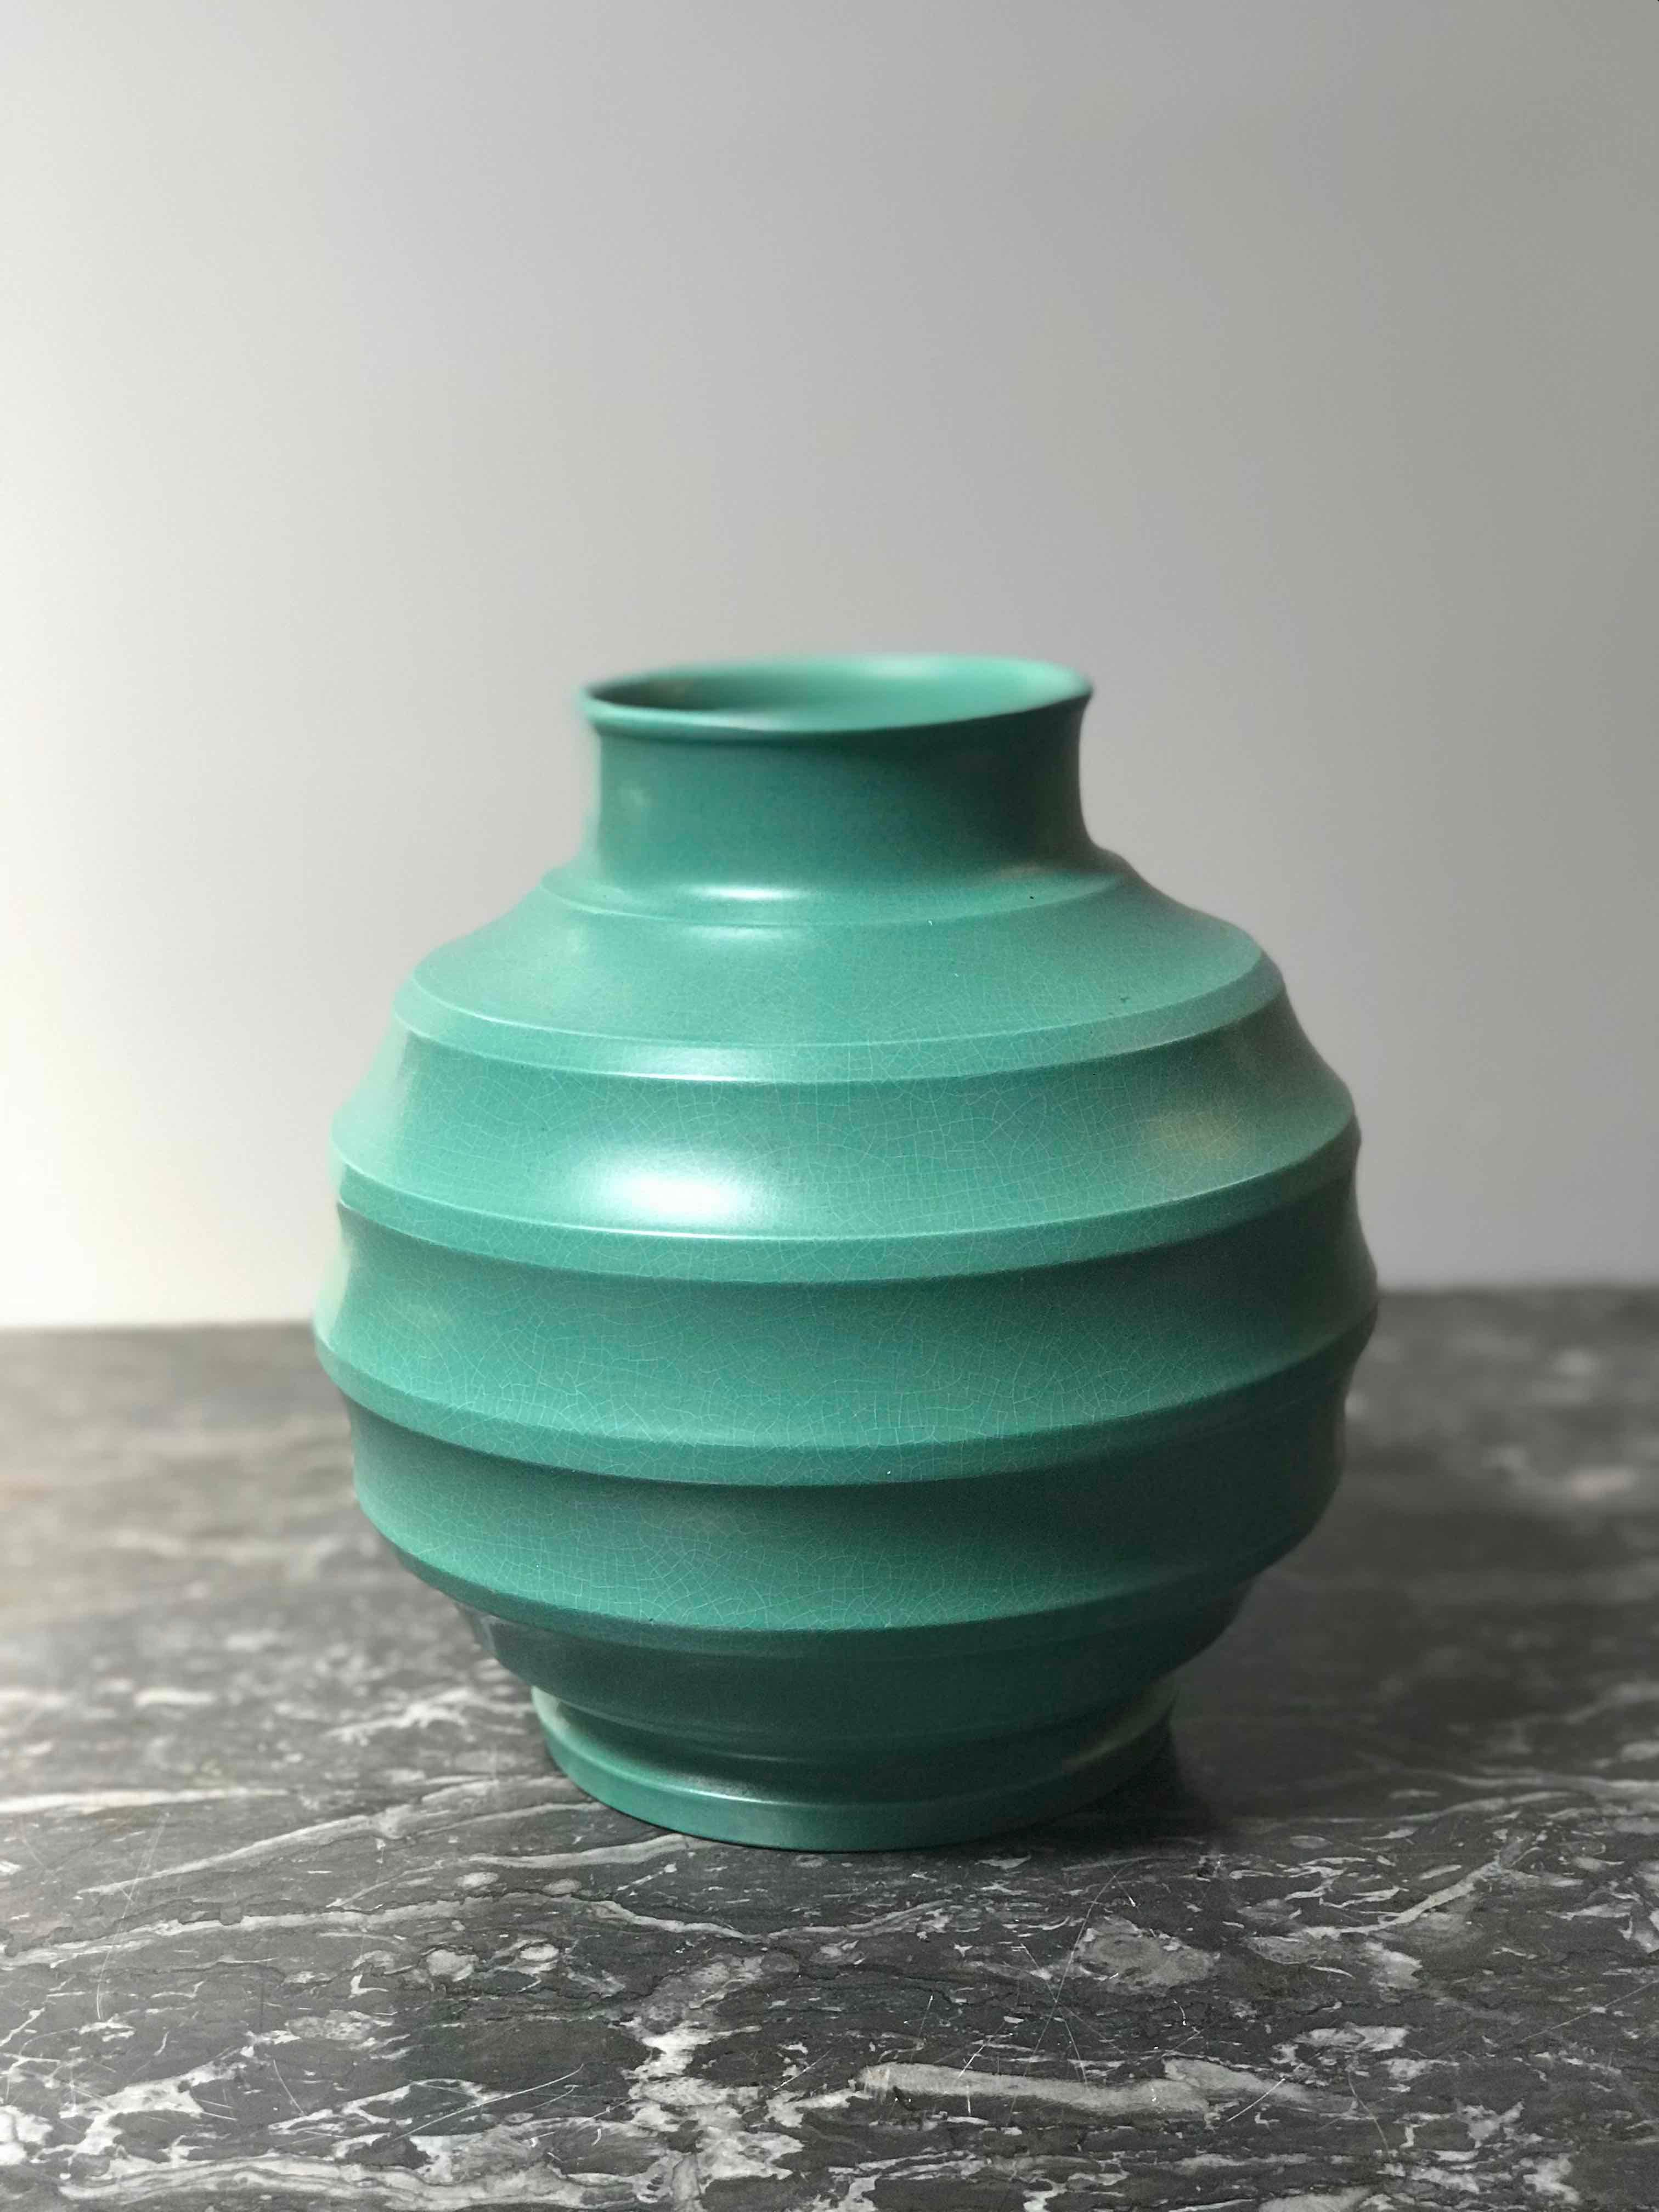 1930s art deco jade green football vase by Keith Murray for Wedgewood. 